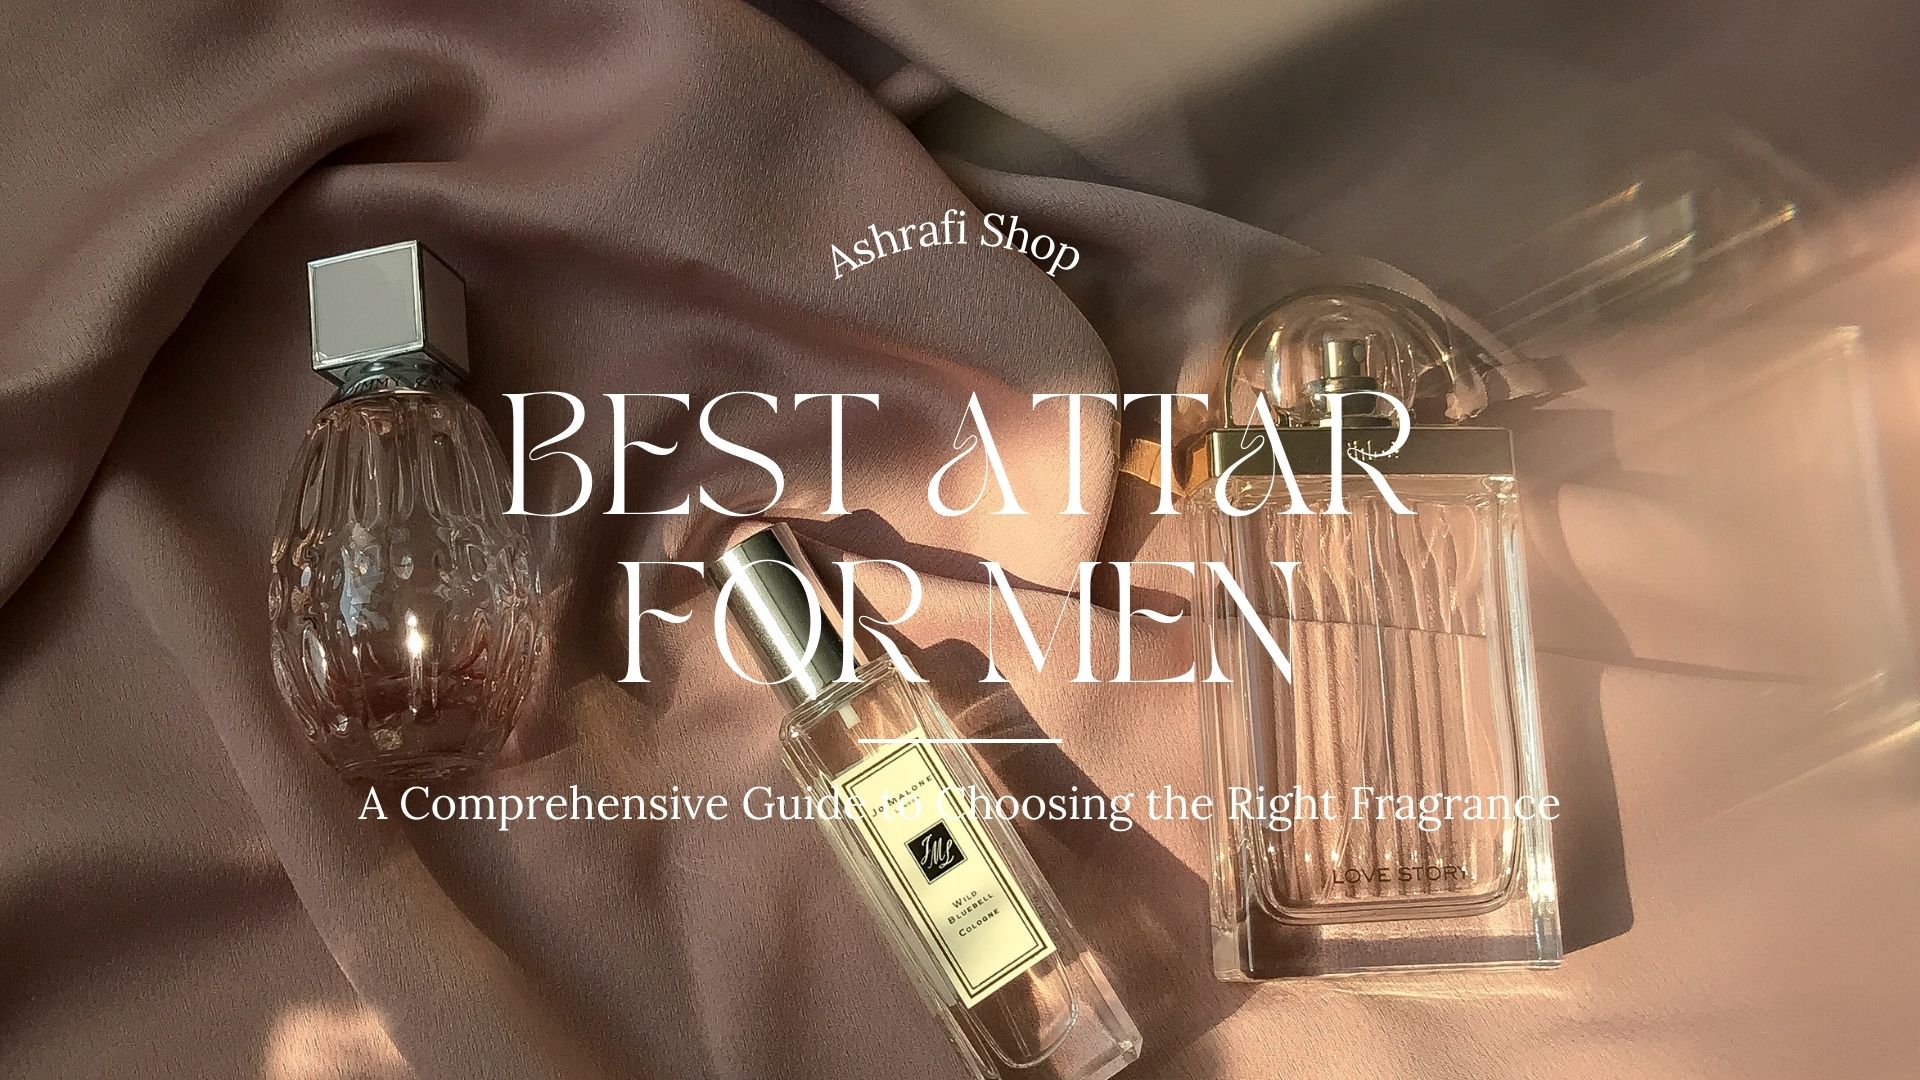 Best Attar for Men: A Comprehensive Guide to Choosing the Right Fragrance